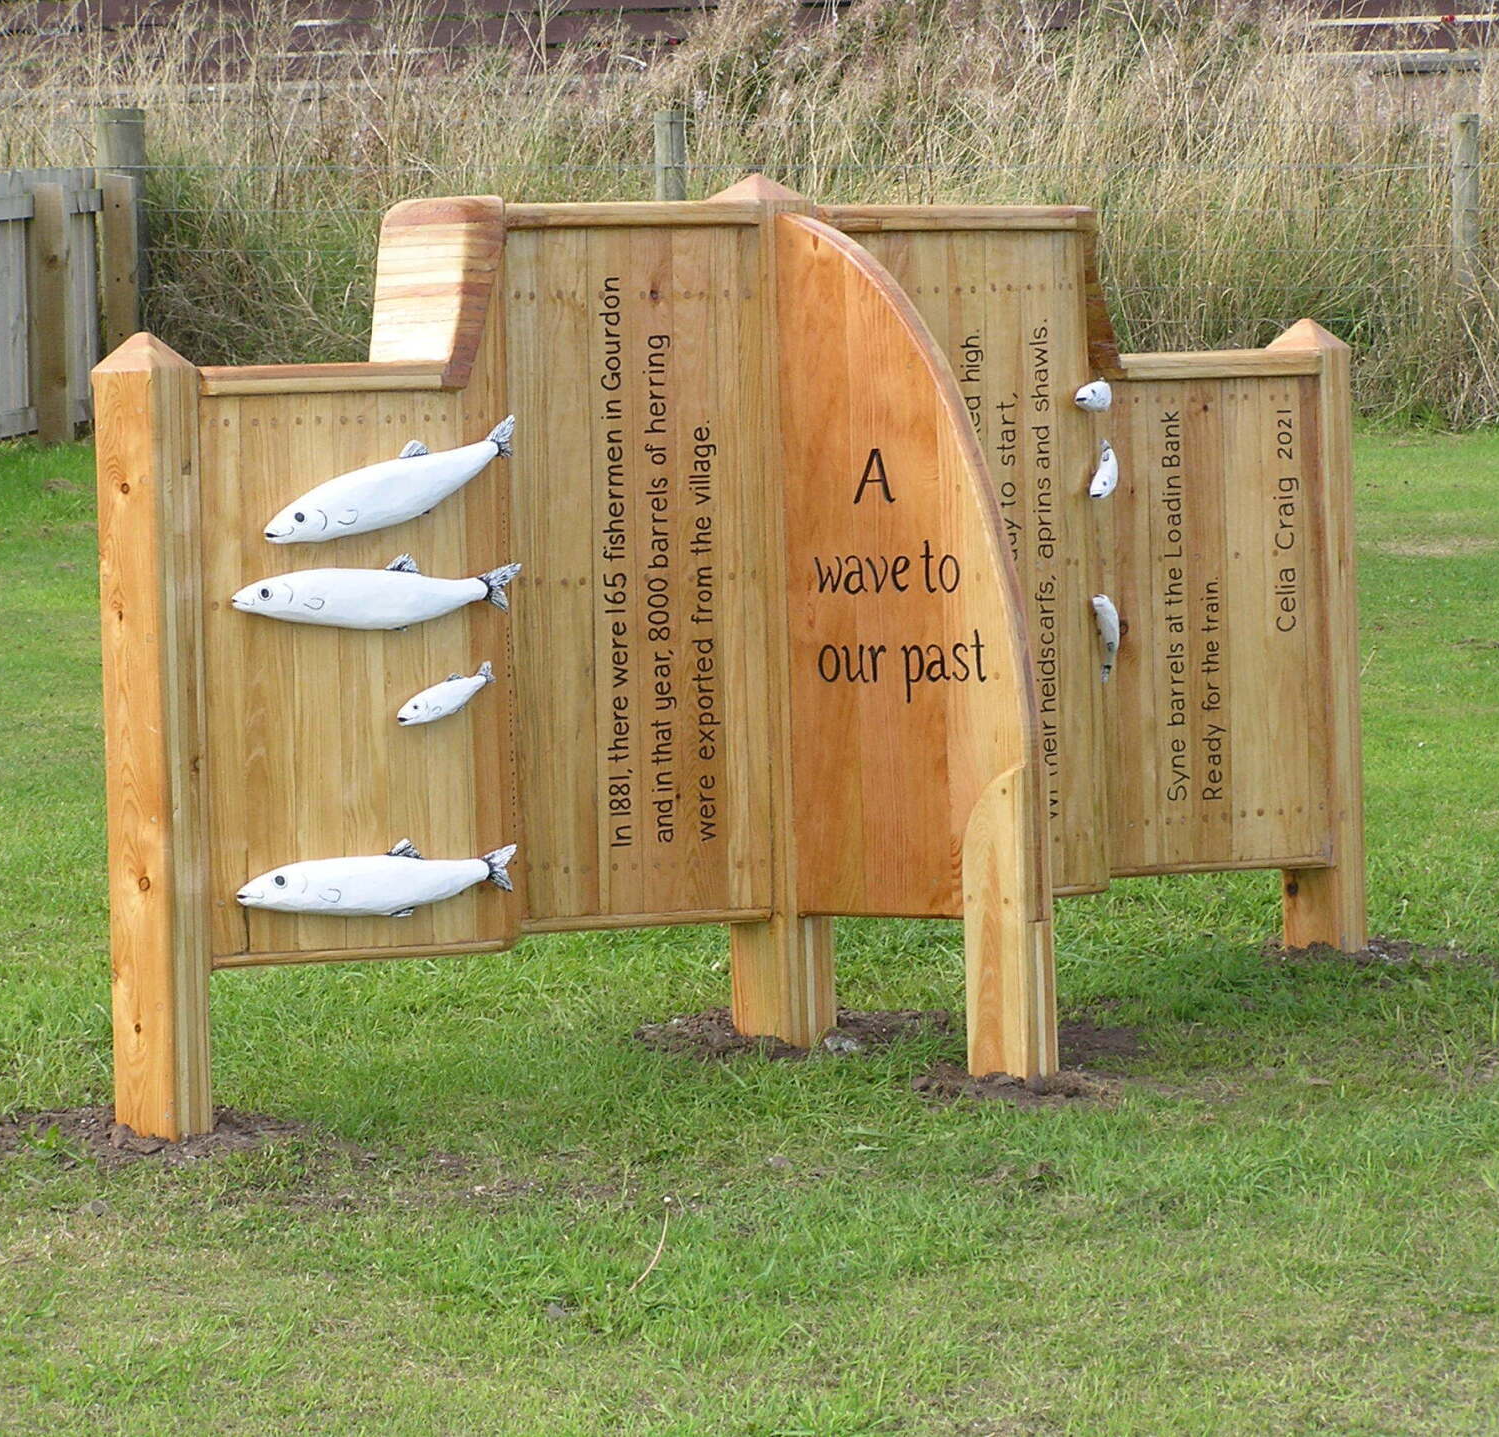 Public Art installation made from sustainable British grown wood. Made by Ingrained Culture.